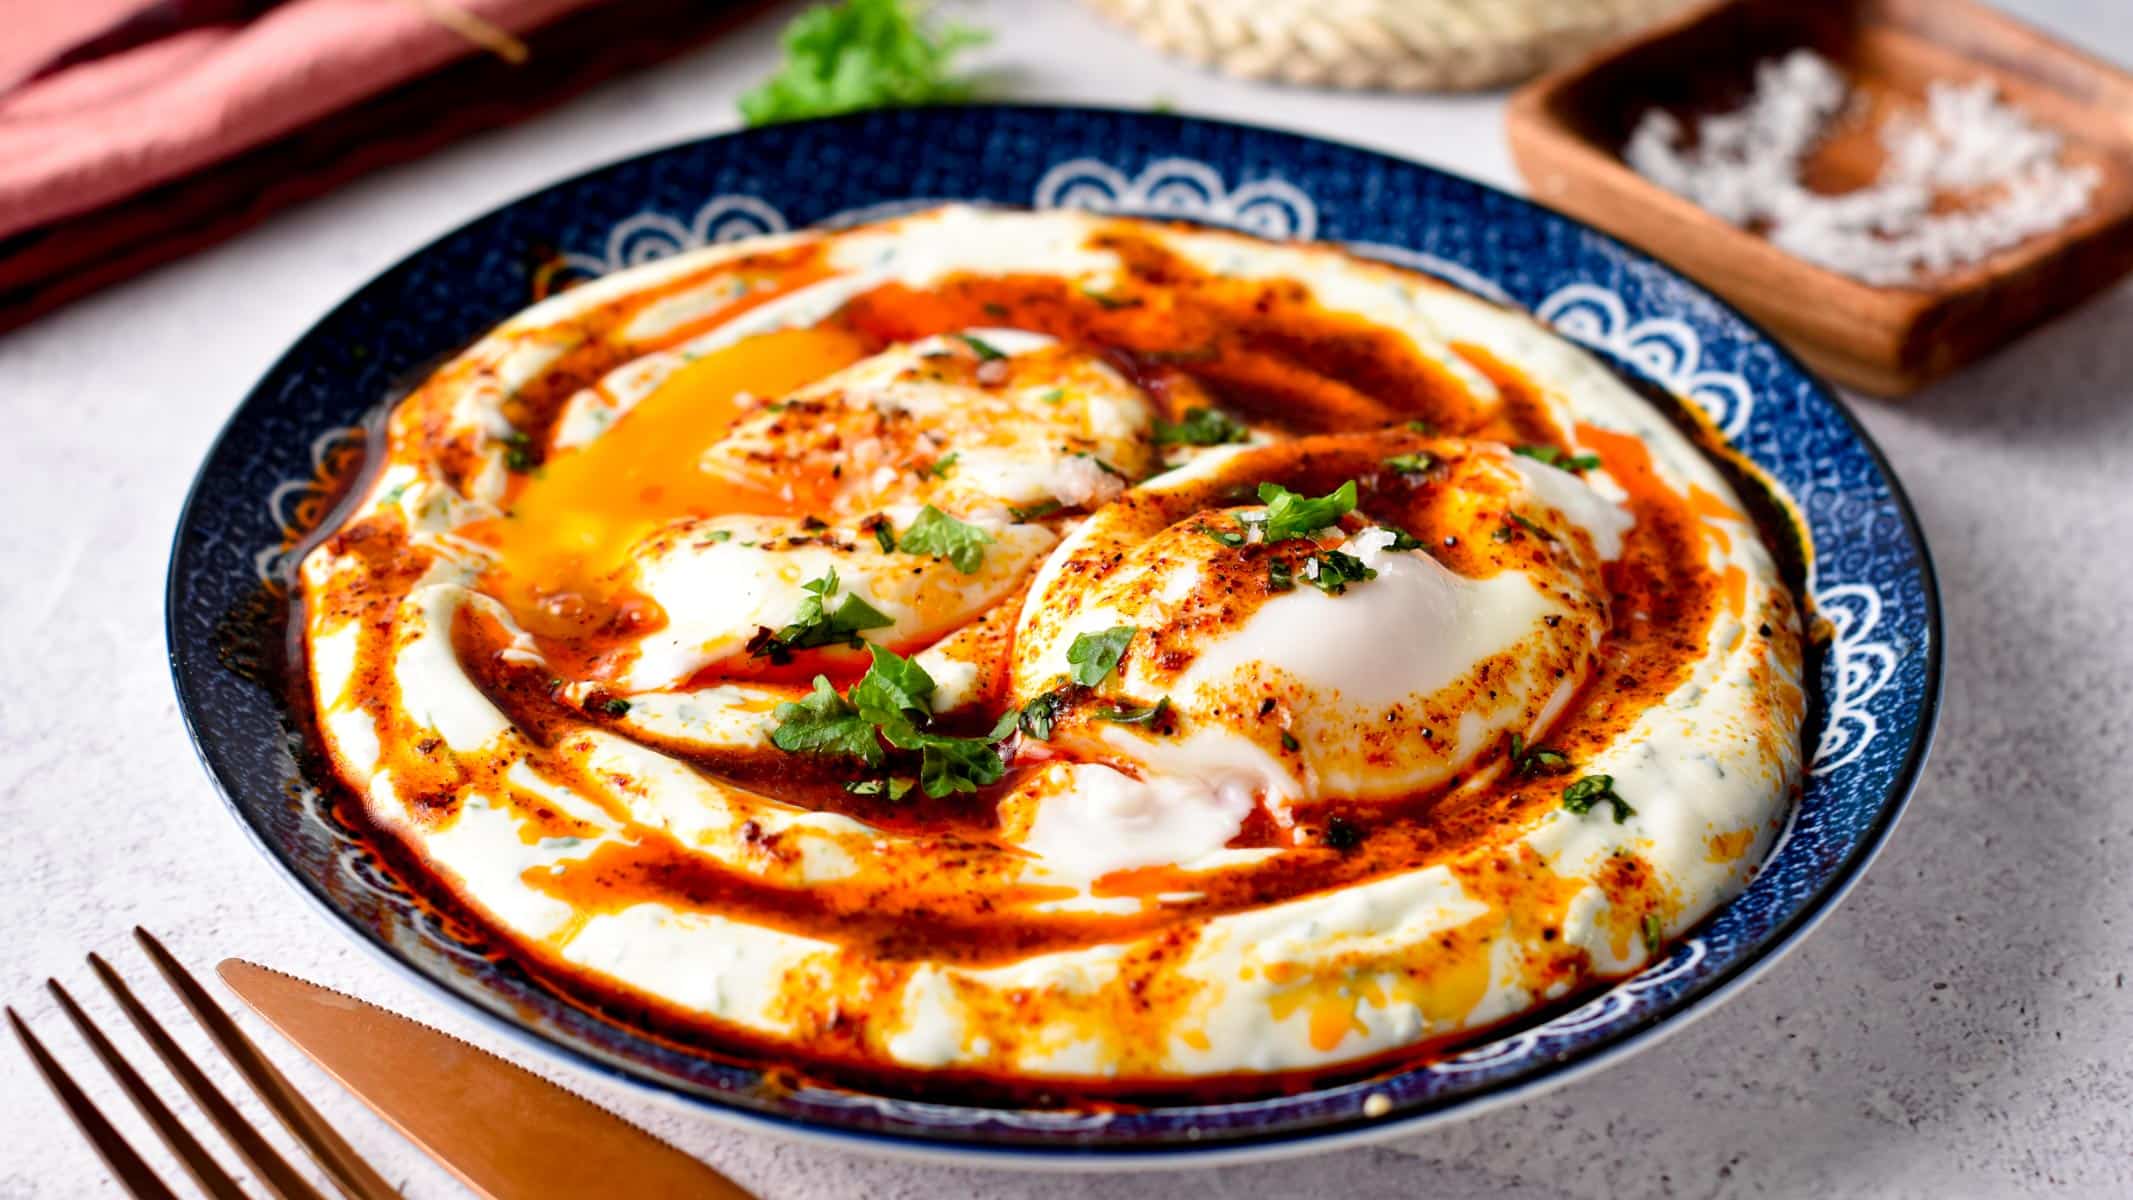 These Turkish Eggs also called Cilbir are the best high-protein low-carb breakfast ever packed with 25 g proteins. An ultra creamy garlic yogurt, topped with warm poached eggs and spicy Aleppo butter.